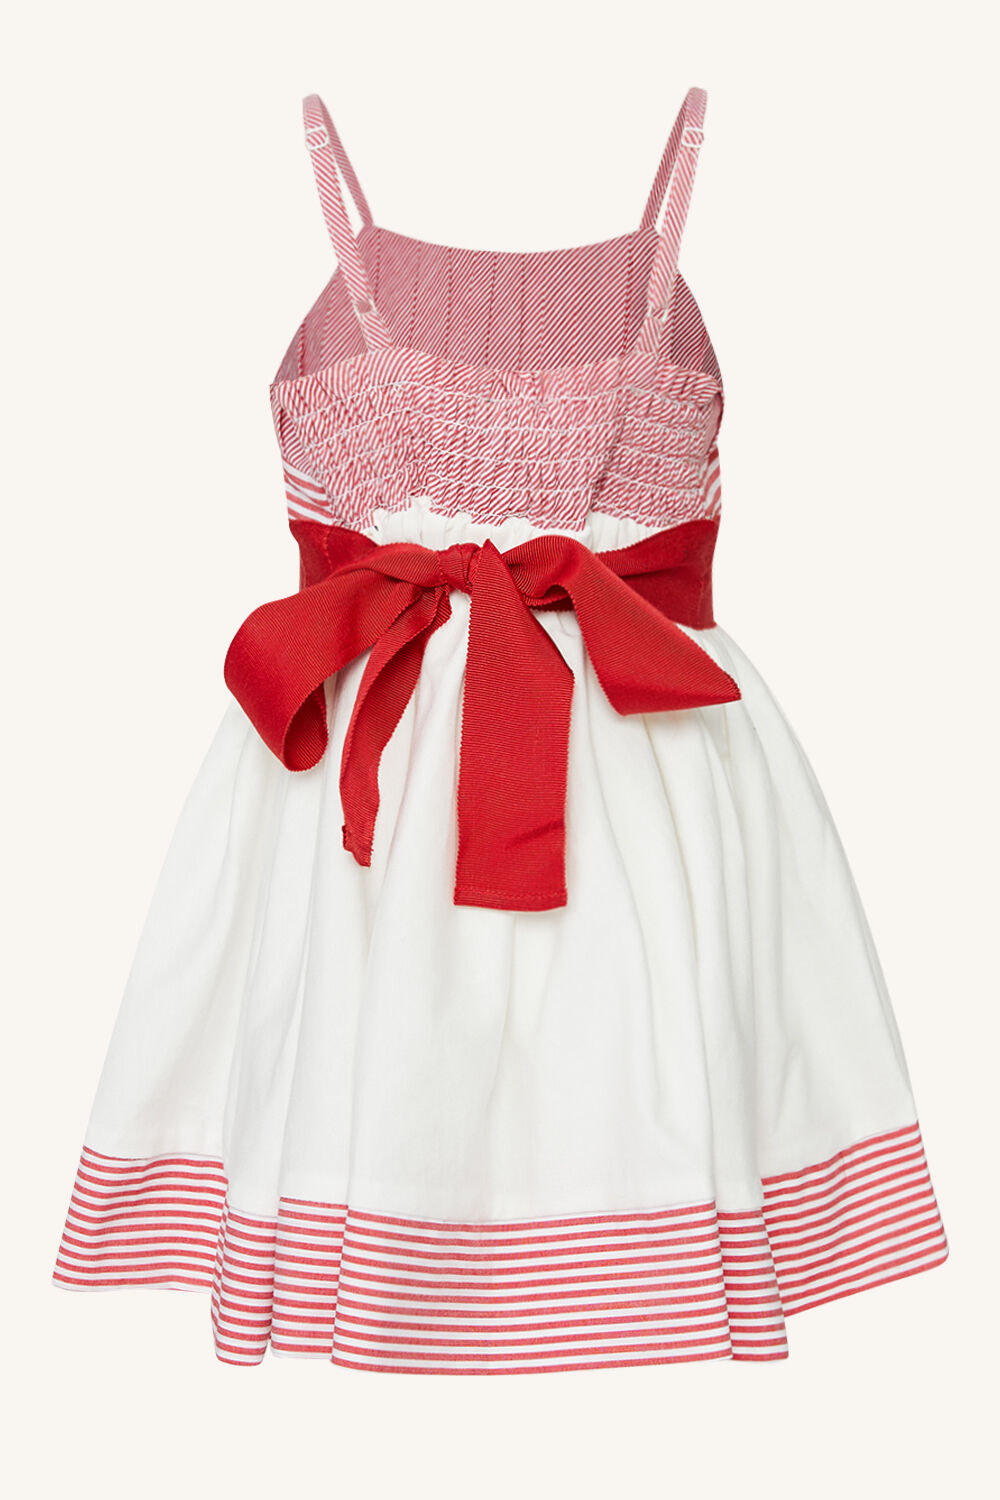 BABY GIRL FRENCHY DRESS in colour TANGO RED